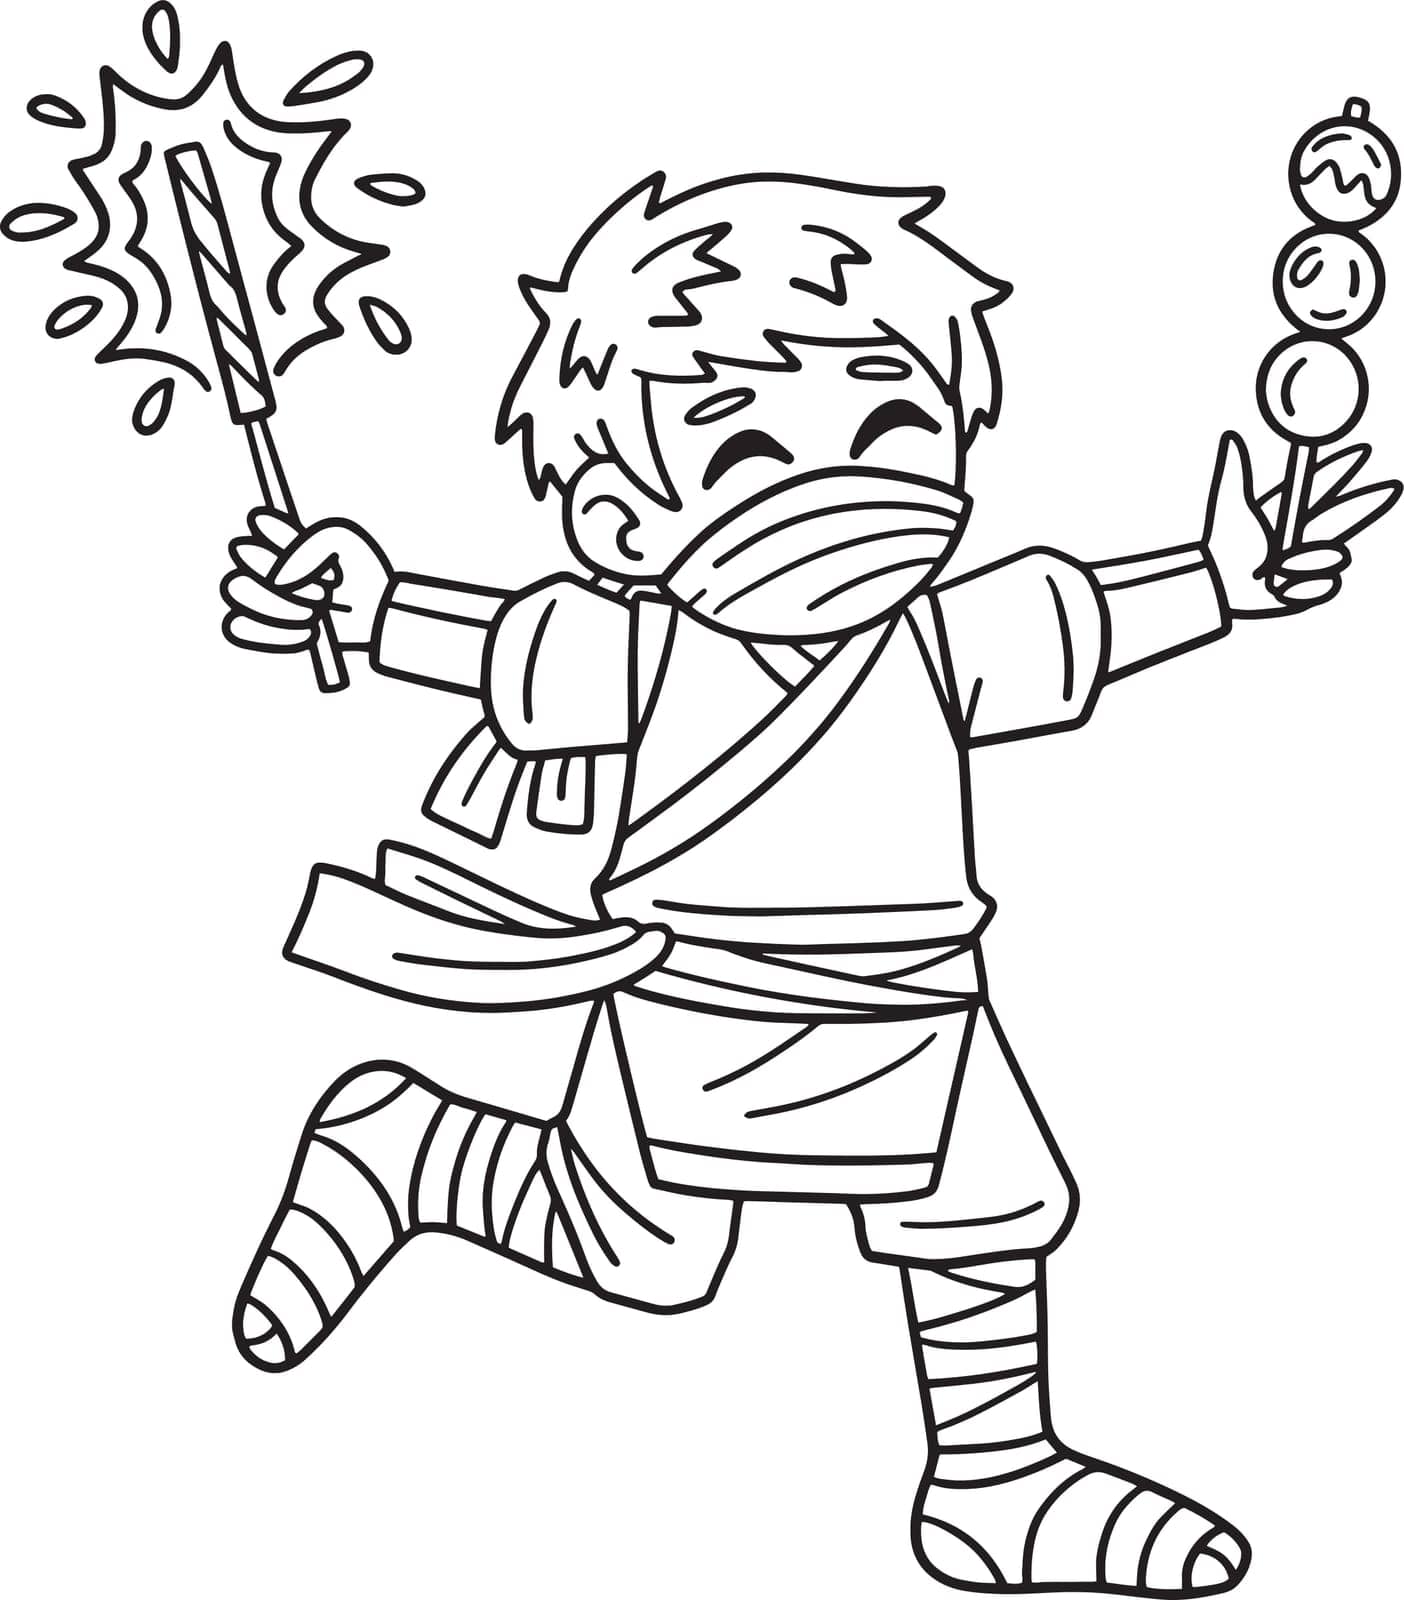 A cute and funny coloring page of a Ninja with Sparklers and Dango. Provides hours of coloring fun for children. Color, this page is very easy. Suitable for little kids and toddlers.